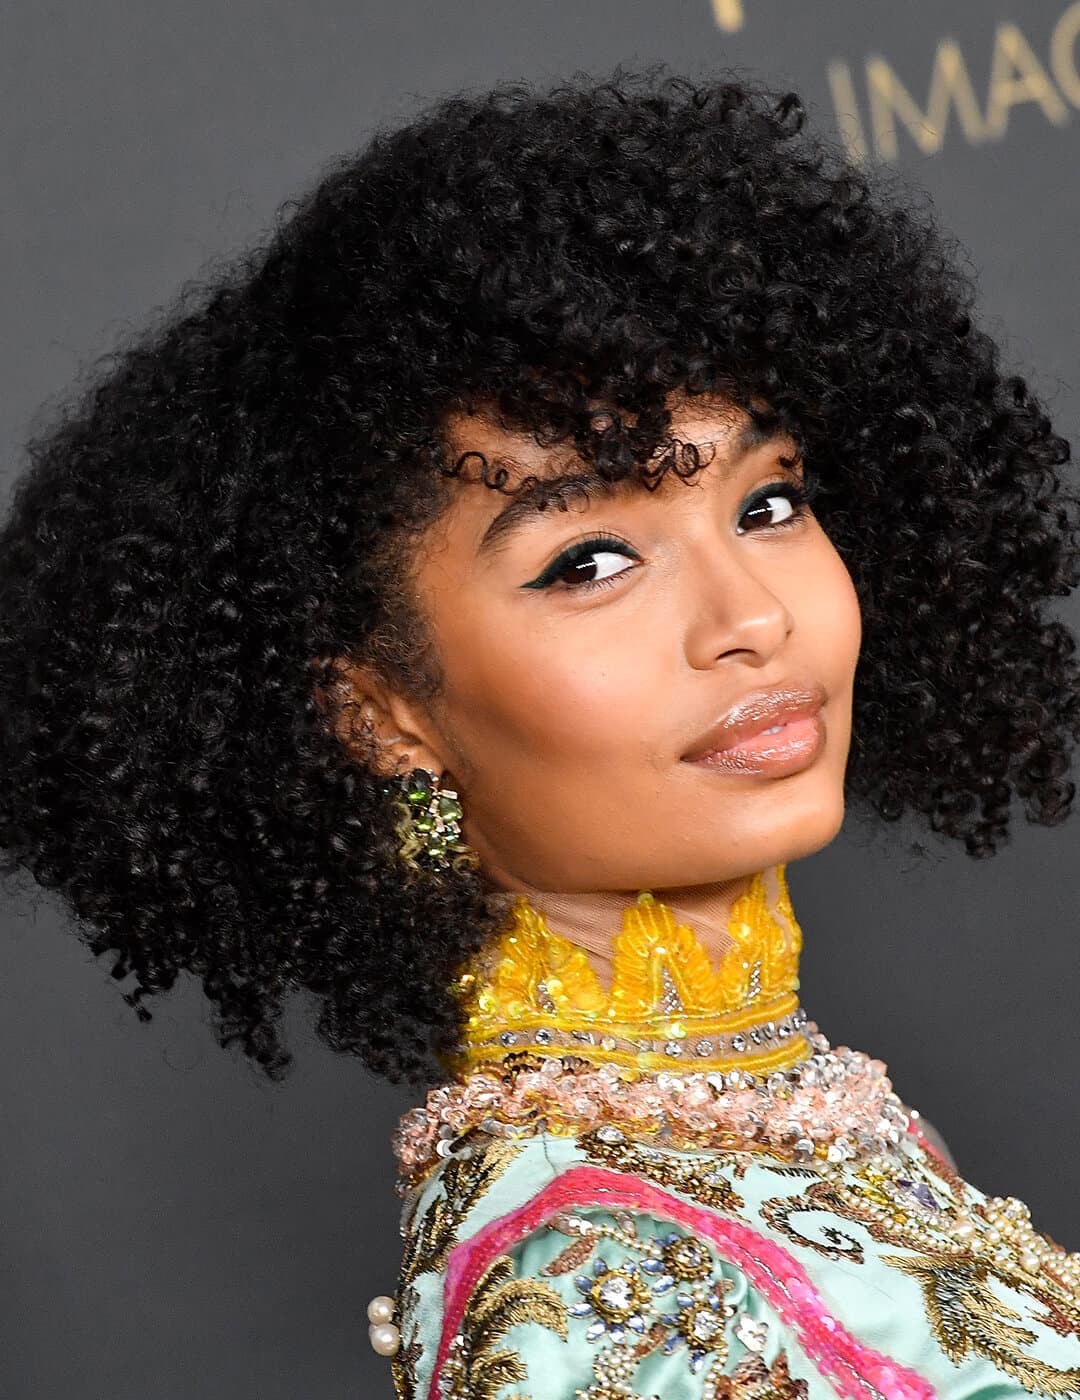 A photo of Yara Shahidi looking fabulous in her curly black bob hair with winged liner on a black background